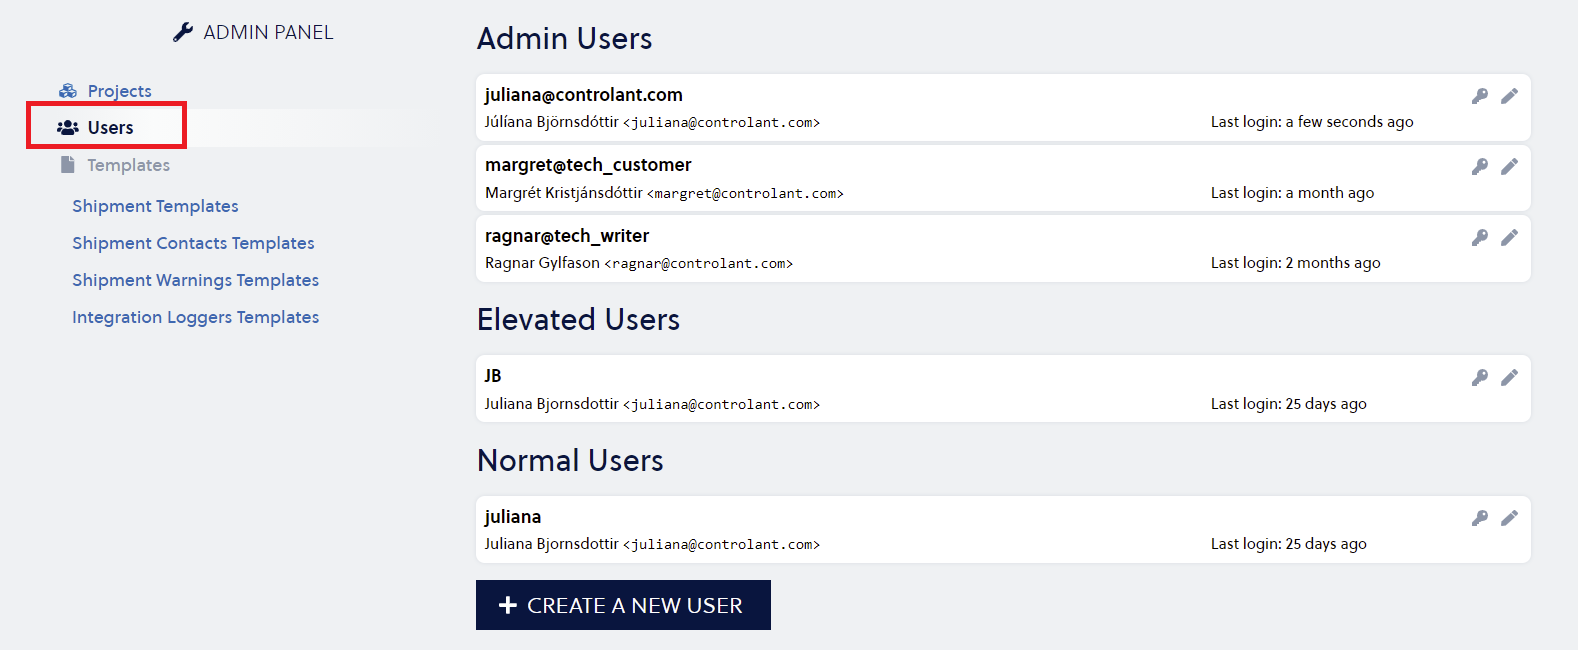 SCM-admin-panel-users-overview.png